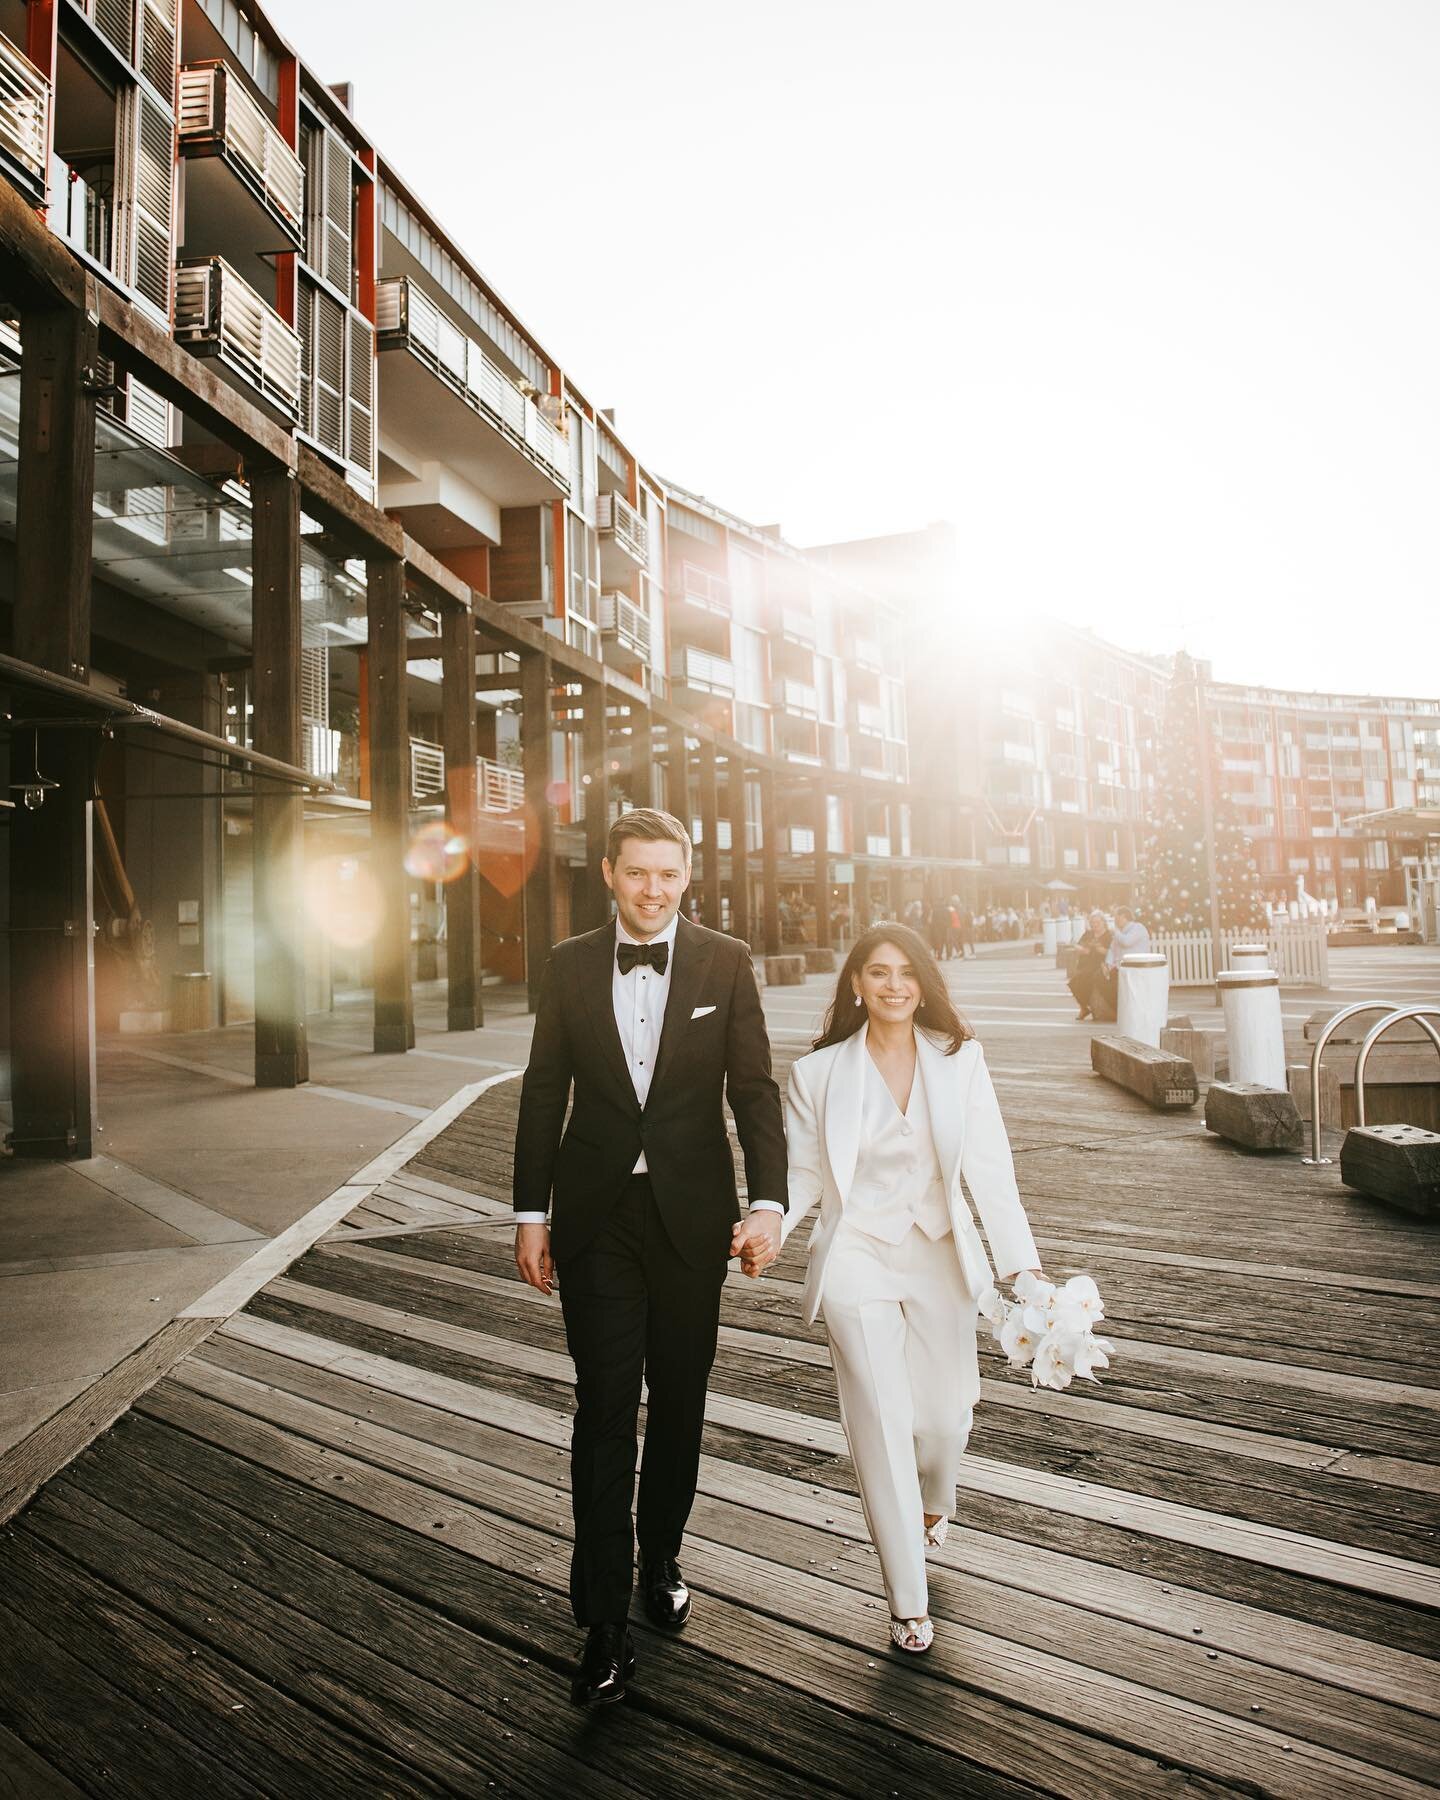 Perfect light, perfect city and most importantly, perfect couple to work with! I&rsquo;ll never get over this day with Mitch and Deepali.

~

Photography: @wills.weddings
Venue:&nbsp;@crownsydney
Dinner: @amaresydney
Celebrant: @jessiecacchillocelebr